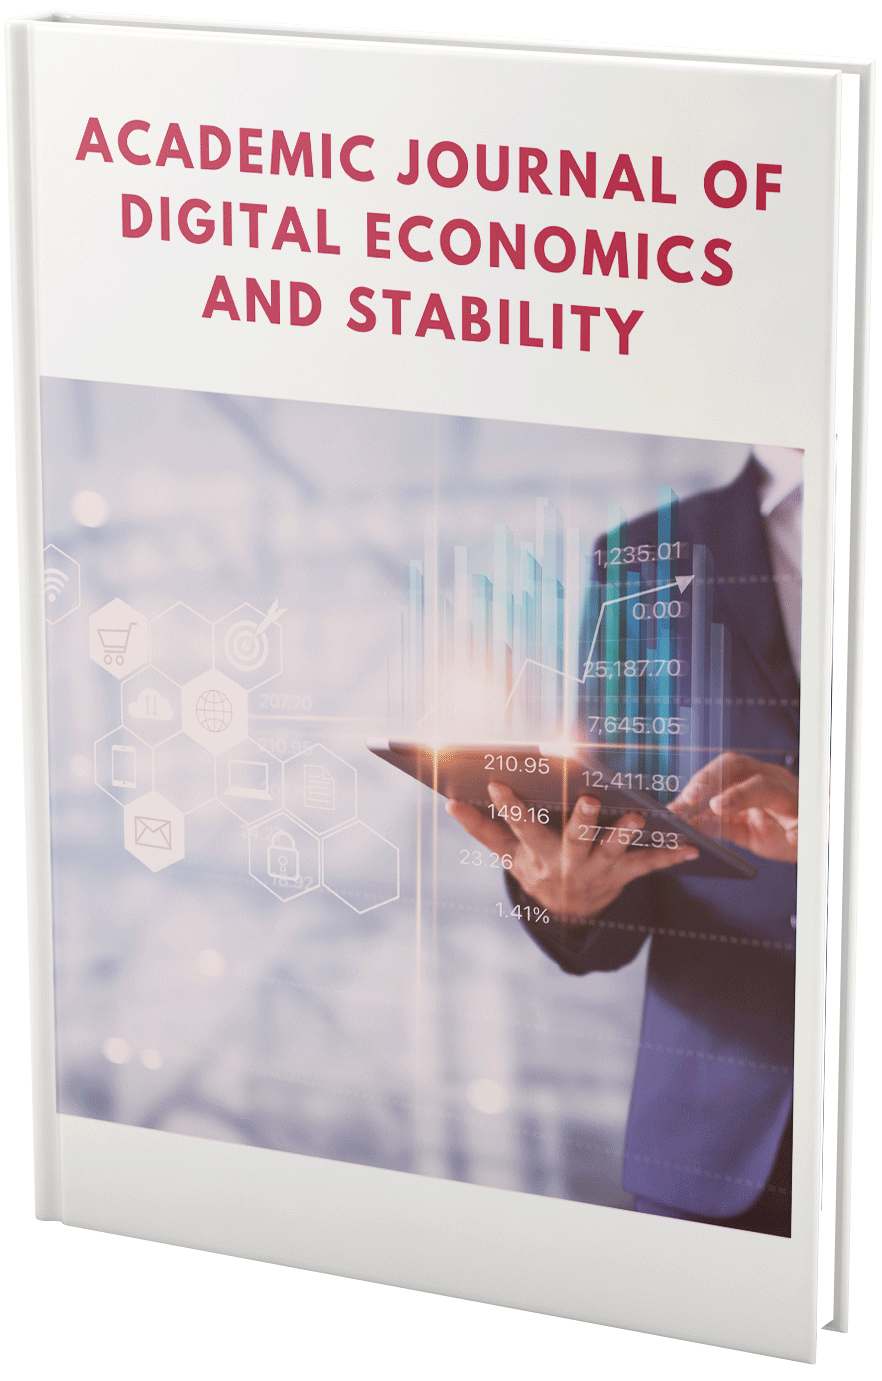 					View Vol. 18 (2022): Academic Journal of Digital Economics and Stability
				